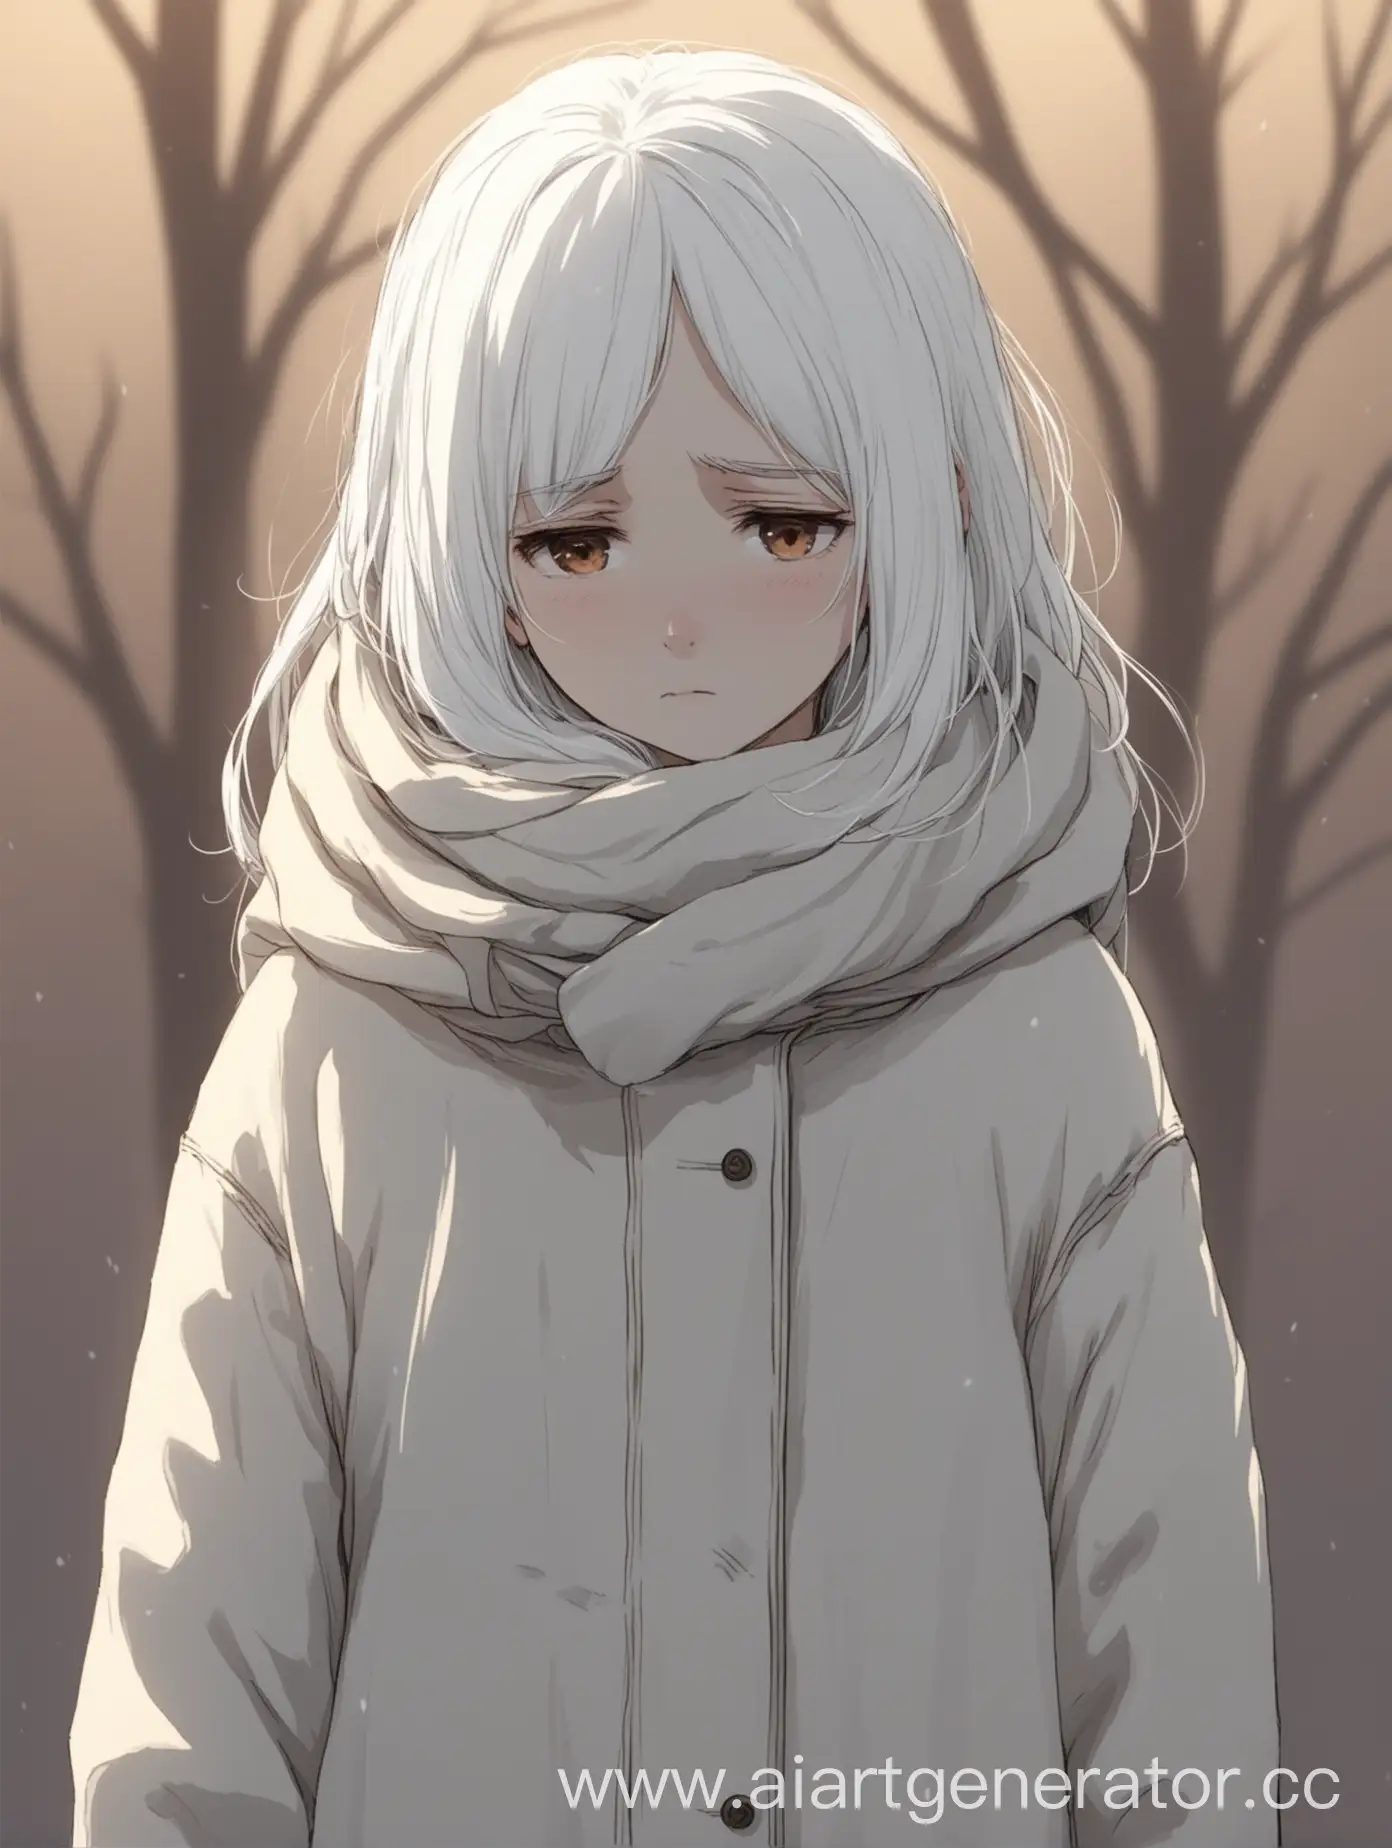 Shy-Girl-with-White-Hair-in-Cozy-Winter-Attire